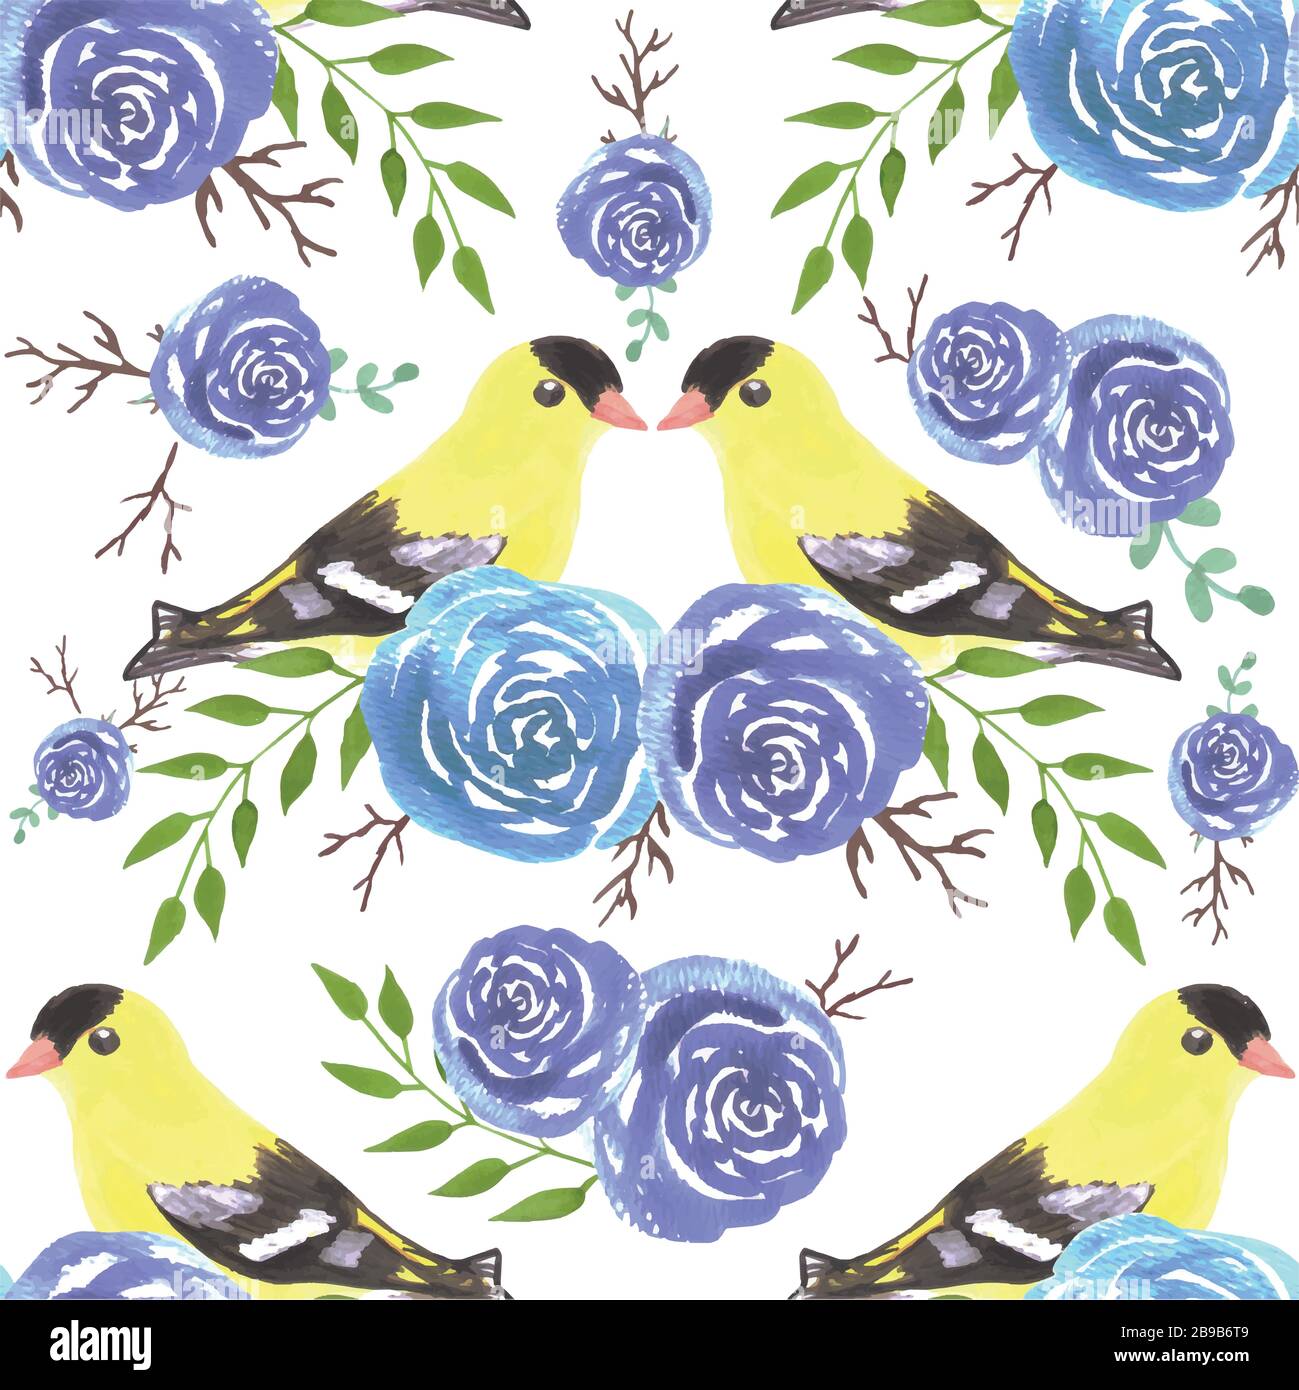 American goldfinches on rose twigs- seamless flowers and yellow birds Stock Vector